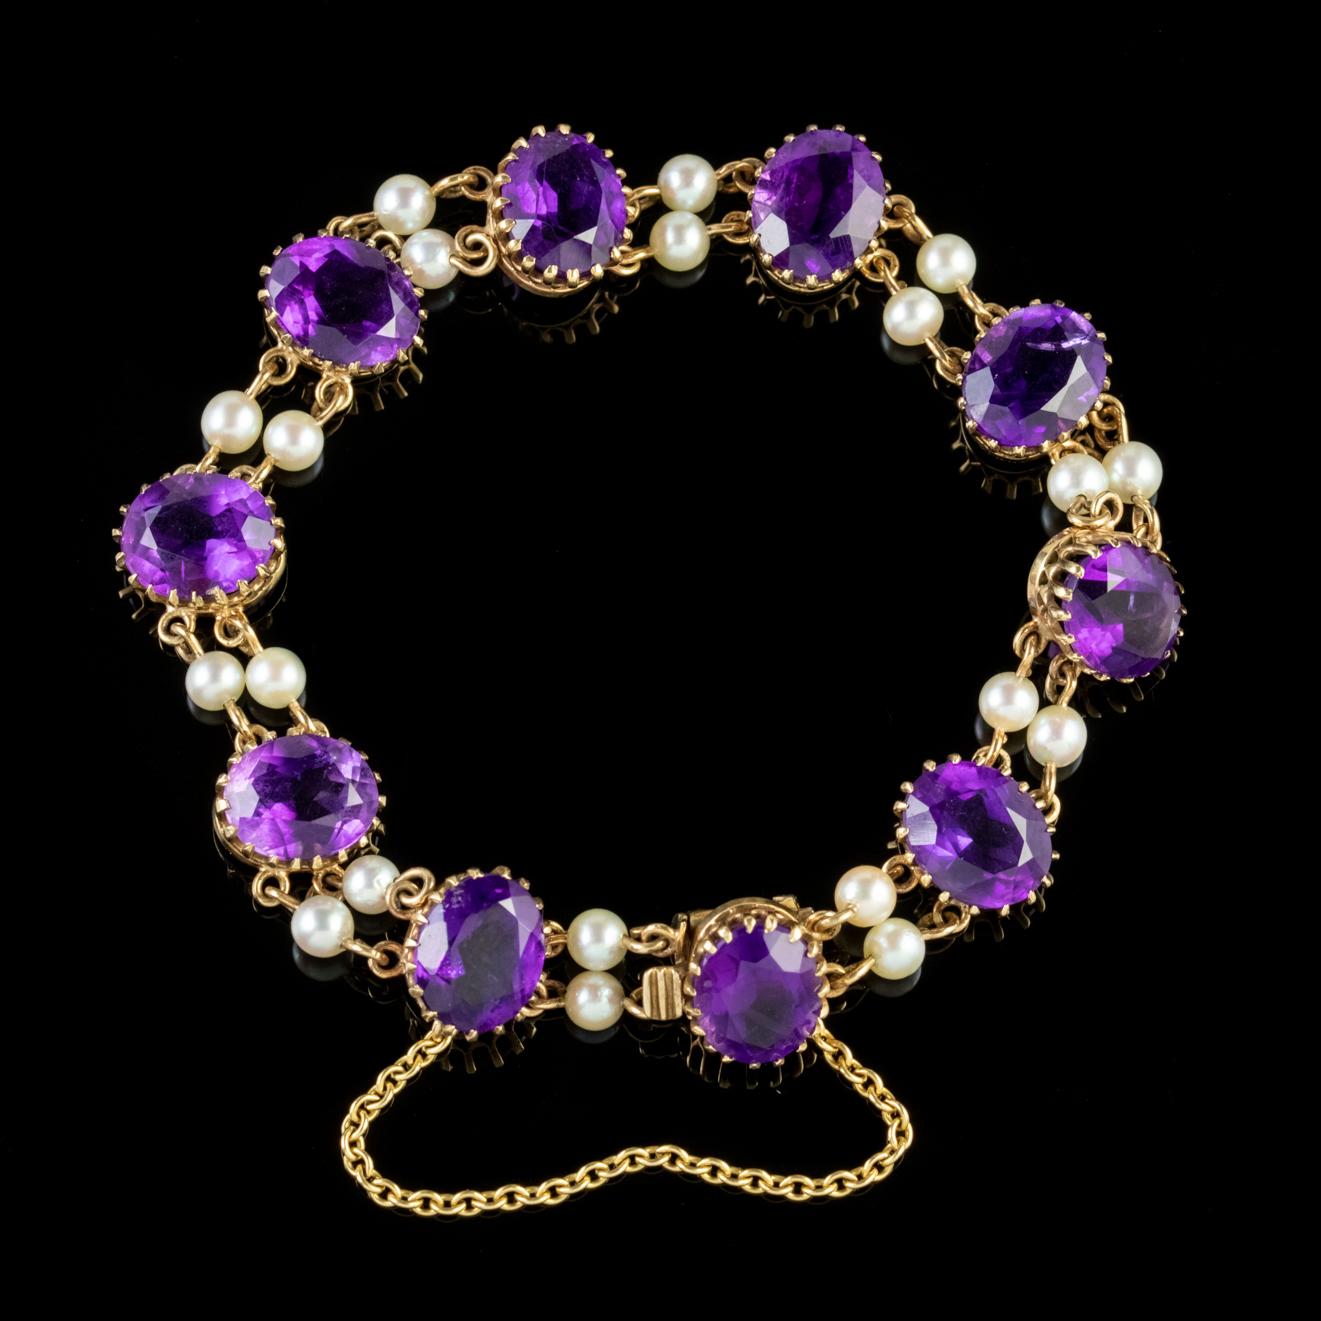 This elegant Victorian Amethyst and Pearl bracelet is beautifully crafted. Each 3.5ct Amethyst is securely held in an 9ct Yellow Gold, crown-shaped gallery, with each link interspersed with two bright Pearls. The box clasp is hallmarked with the